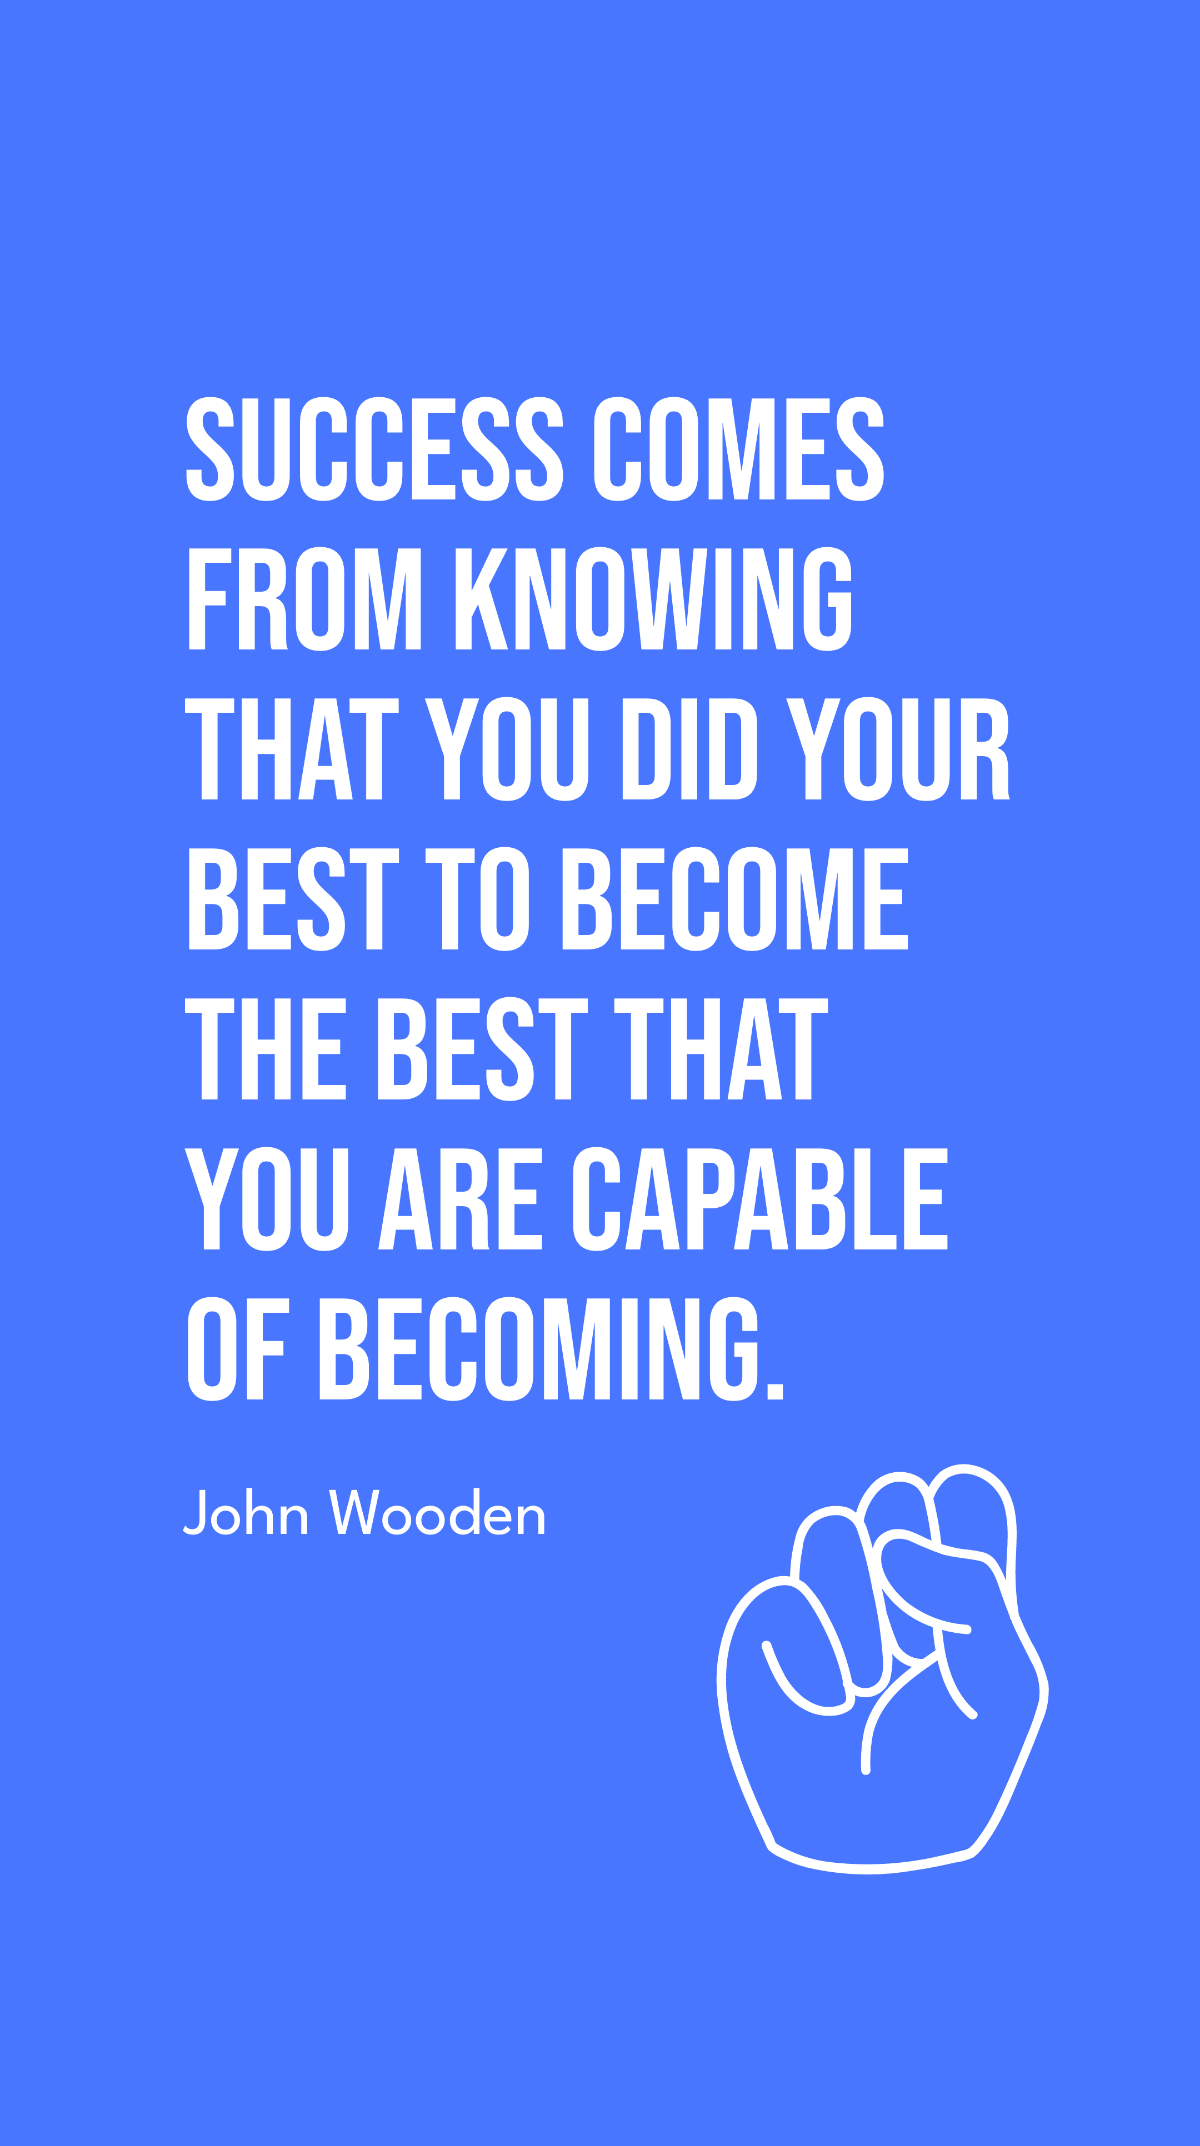 John Wooden - Success comes from knowing that you did your best to become the best that you are capable of becoming. Template